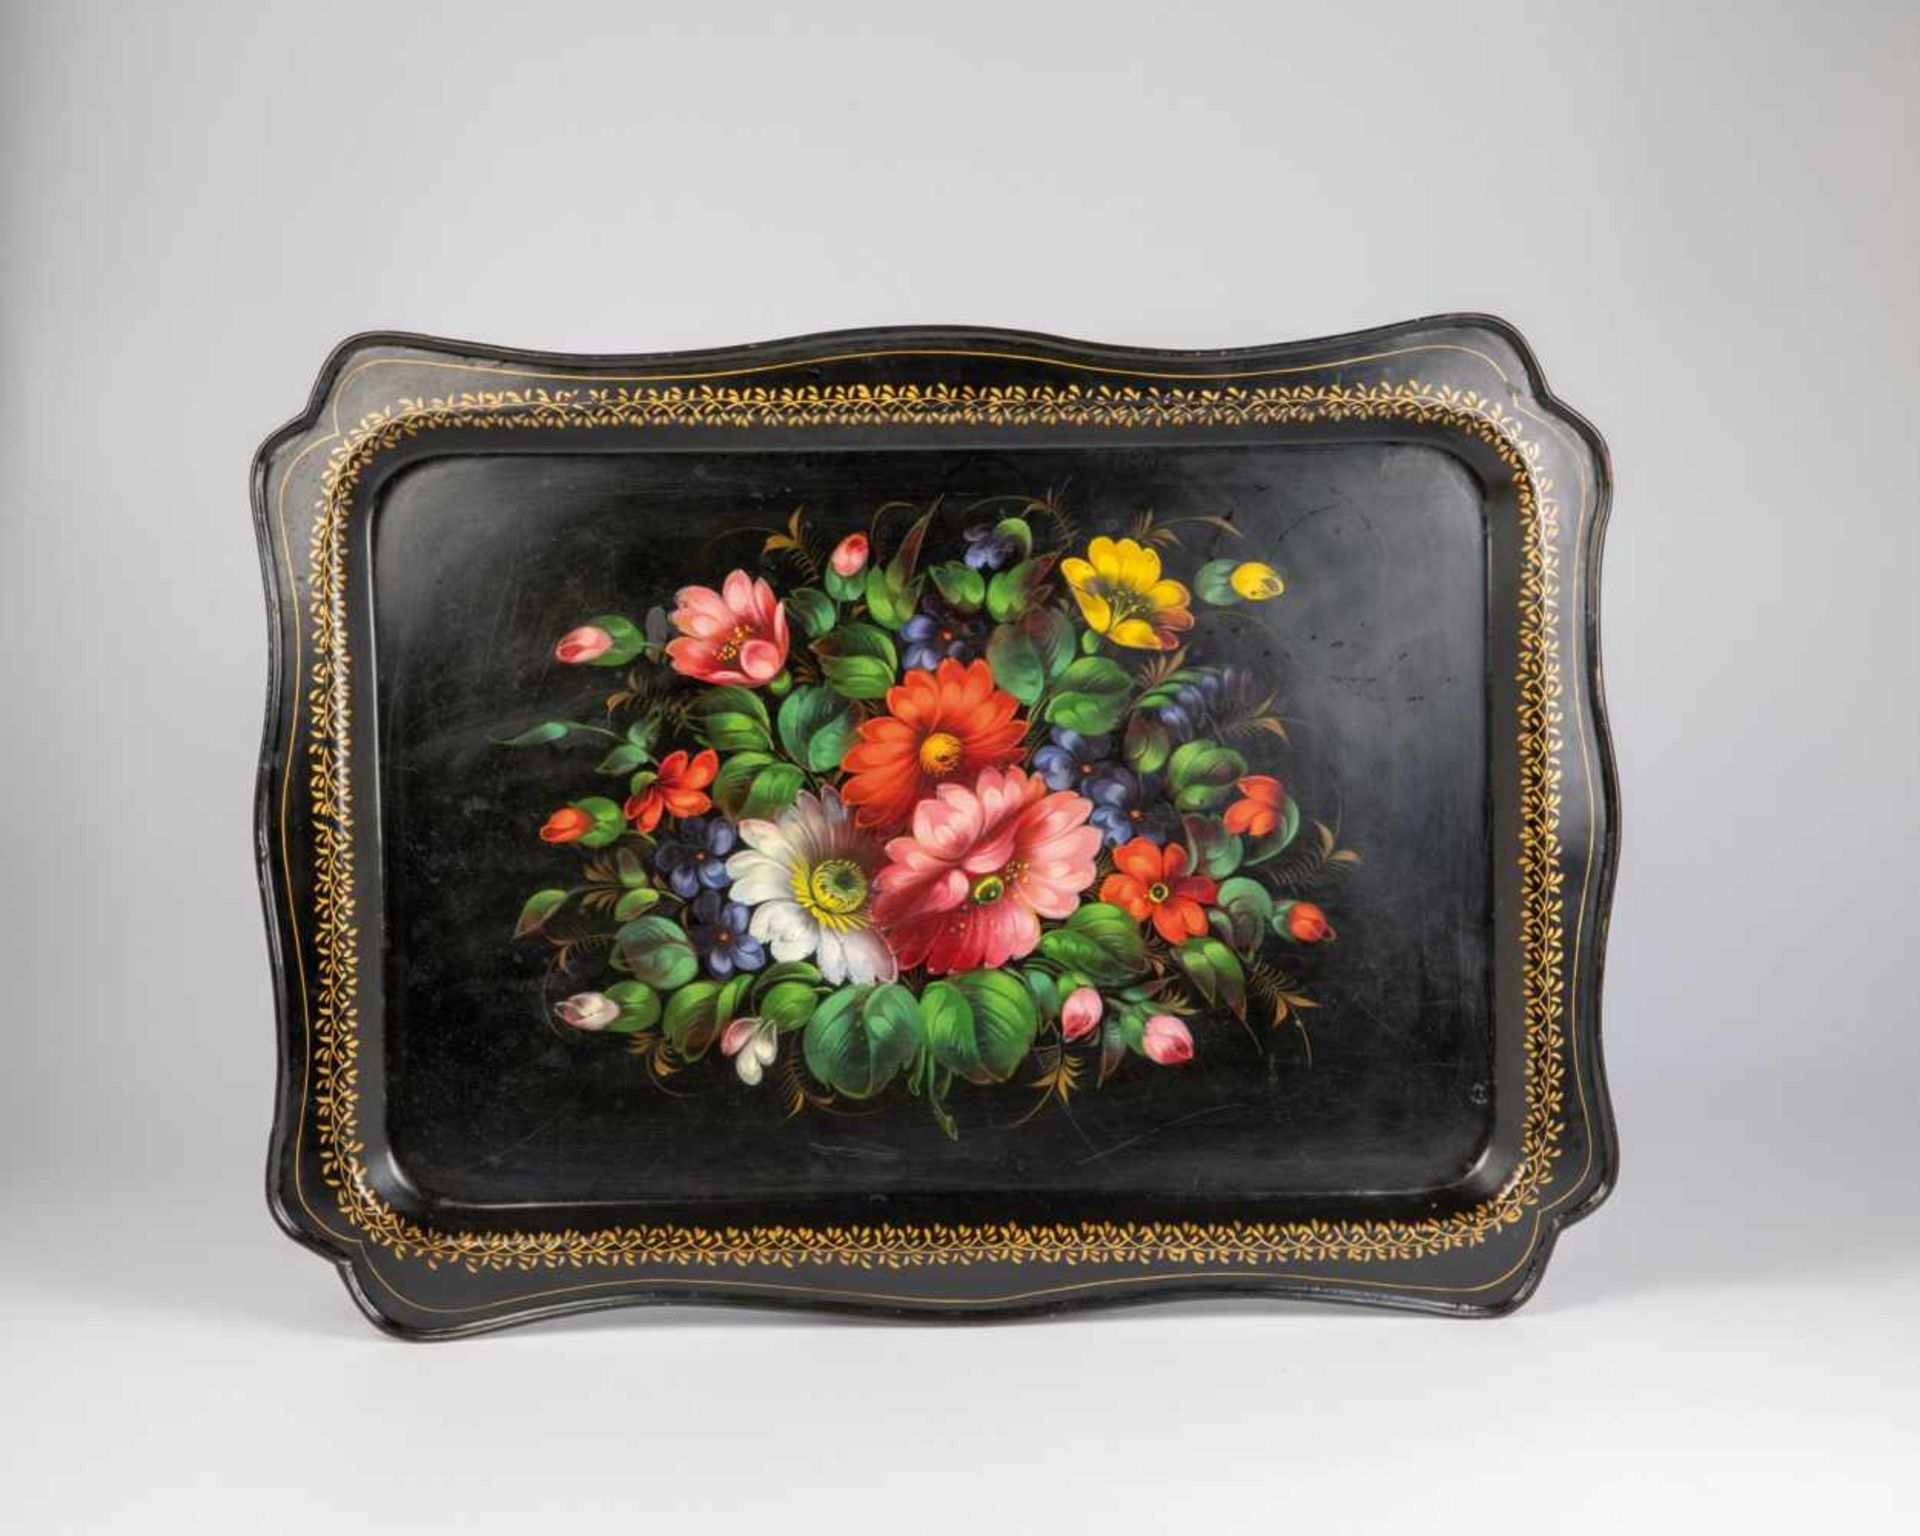 A large metal tray with flowers. Russia, Zhostovo, workshop Metallopodnos, after 1928.Polychrome